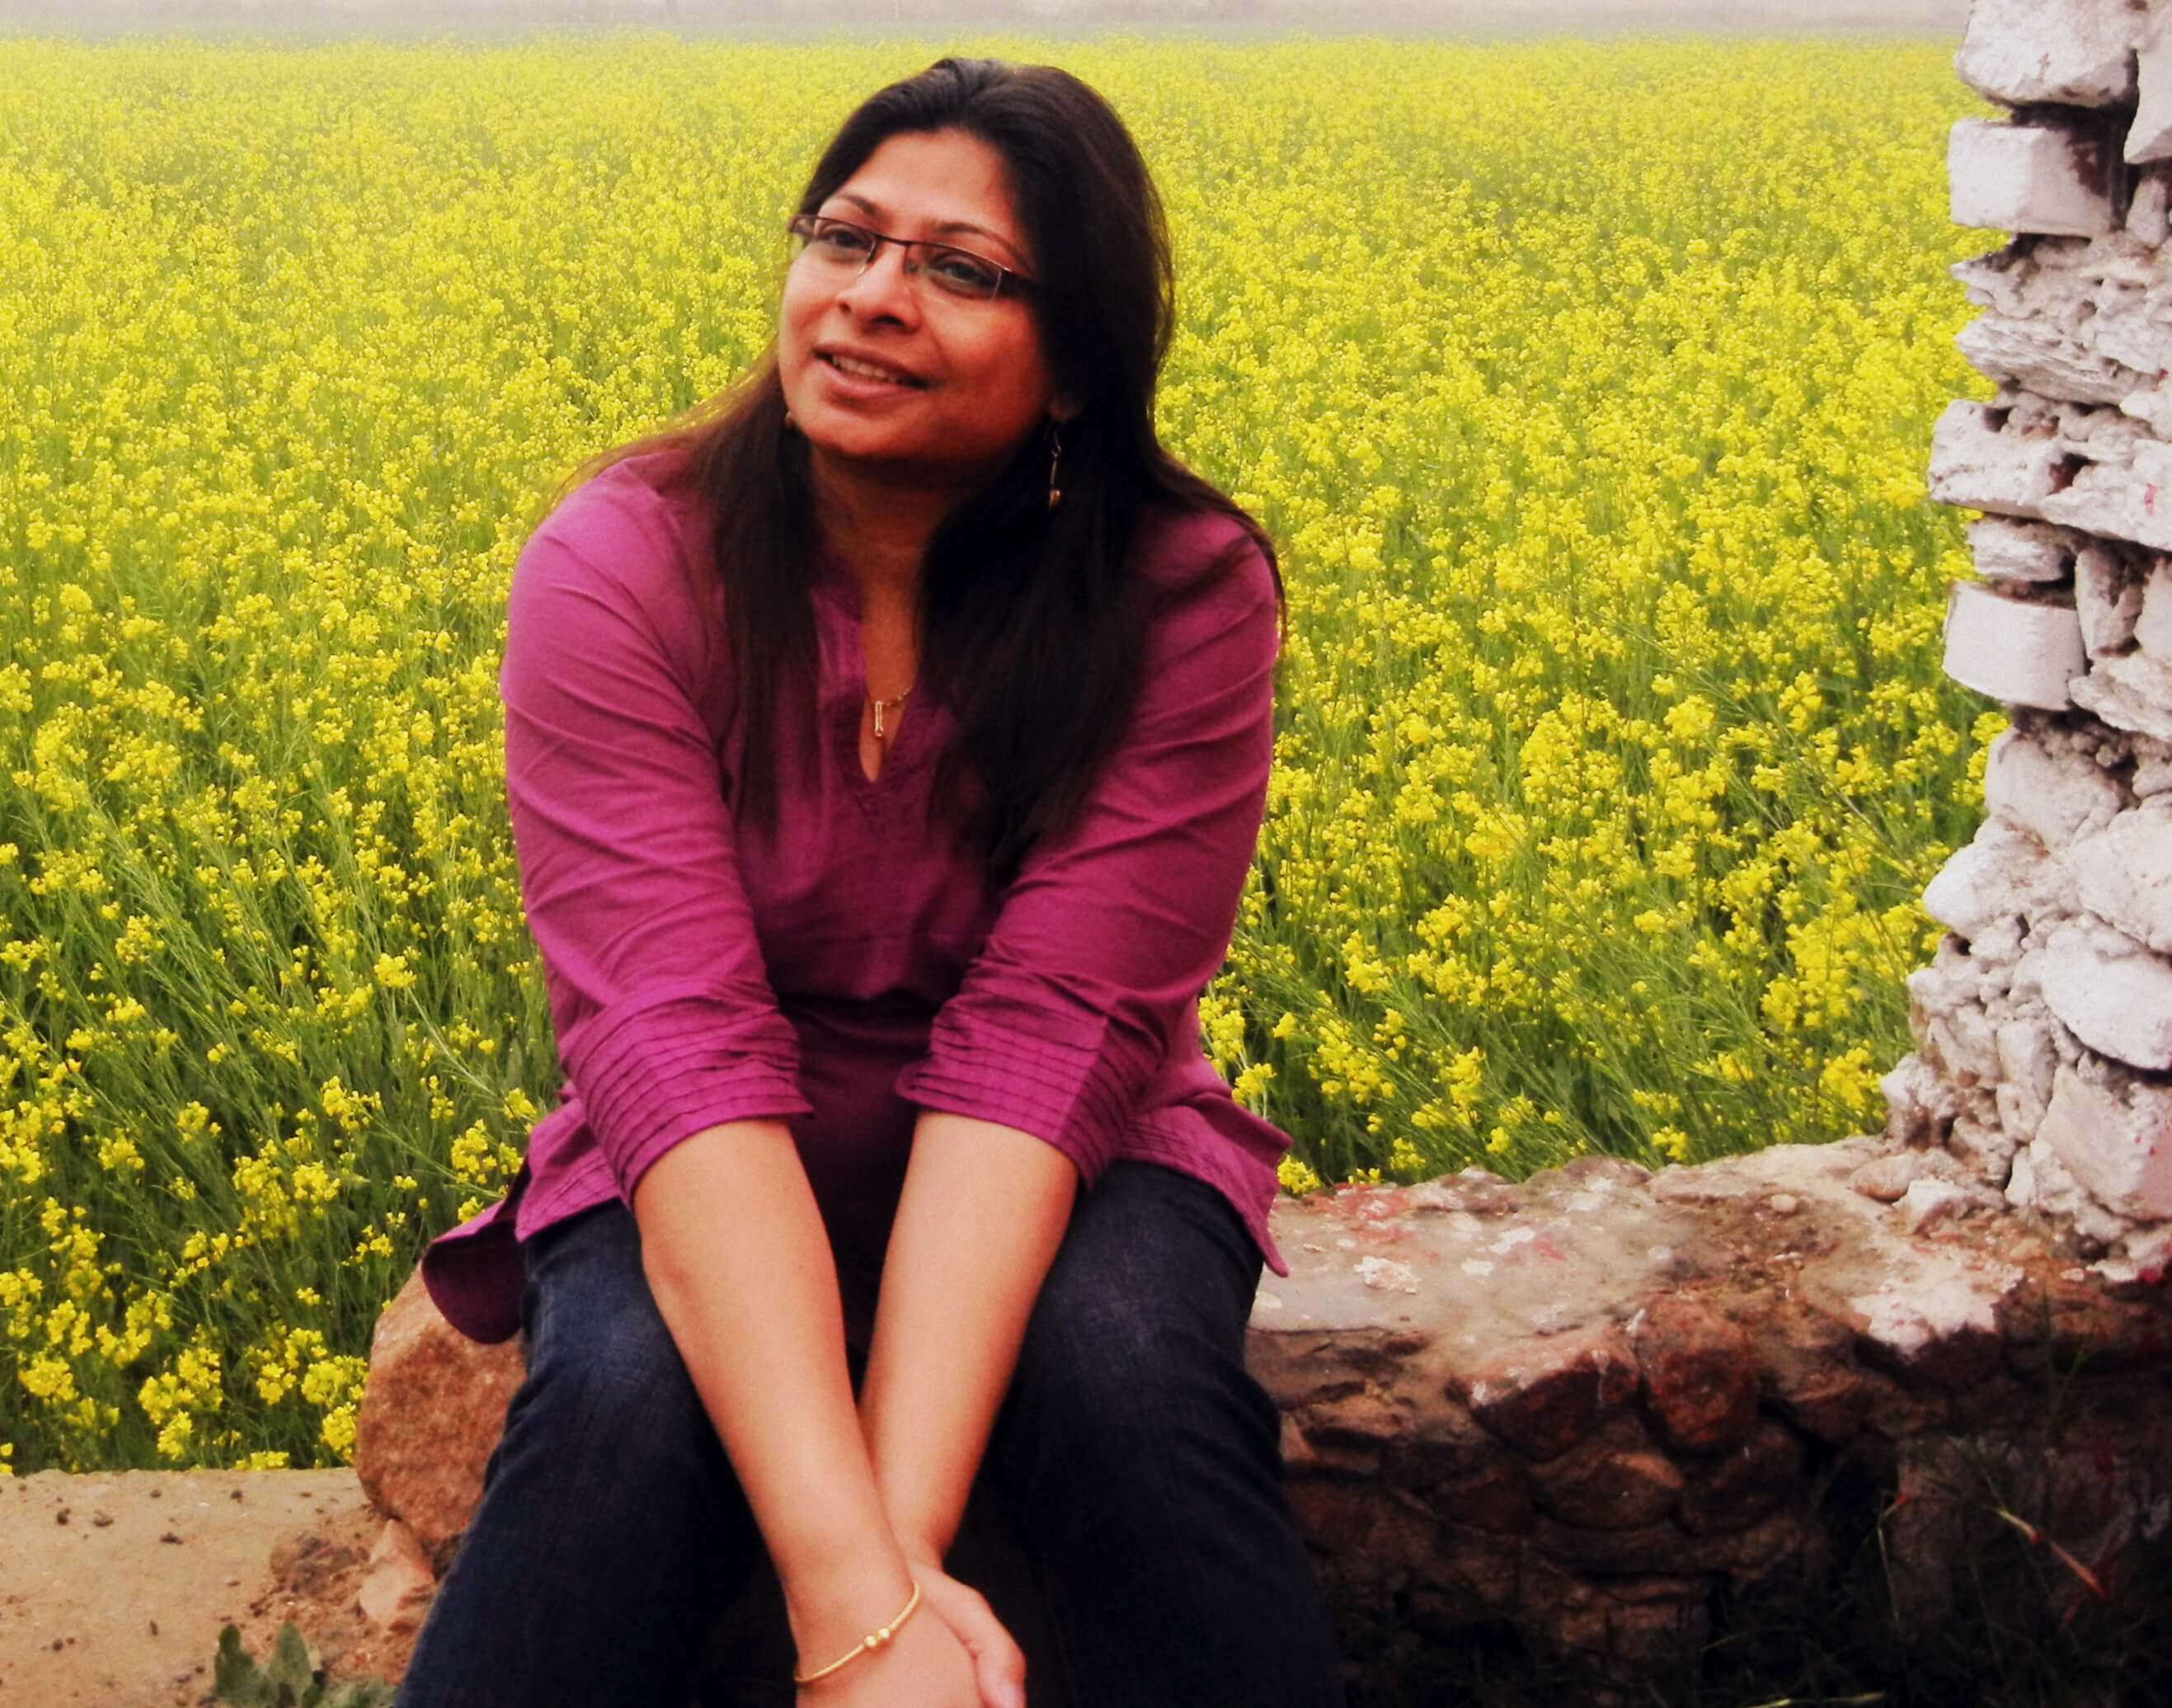 Rashmi believes that the literary scene in India is exciting